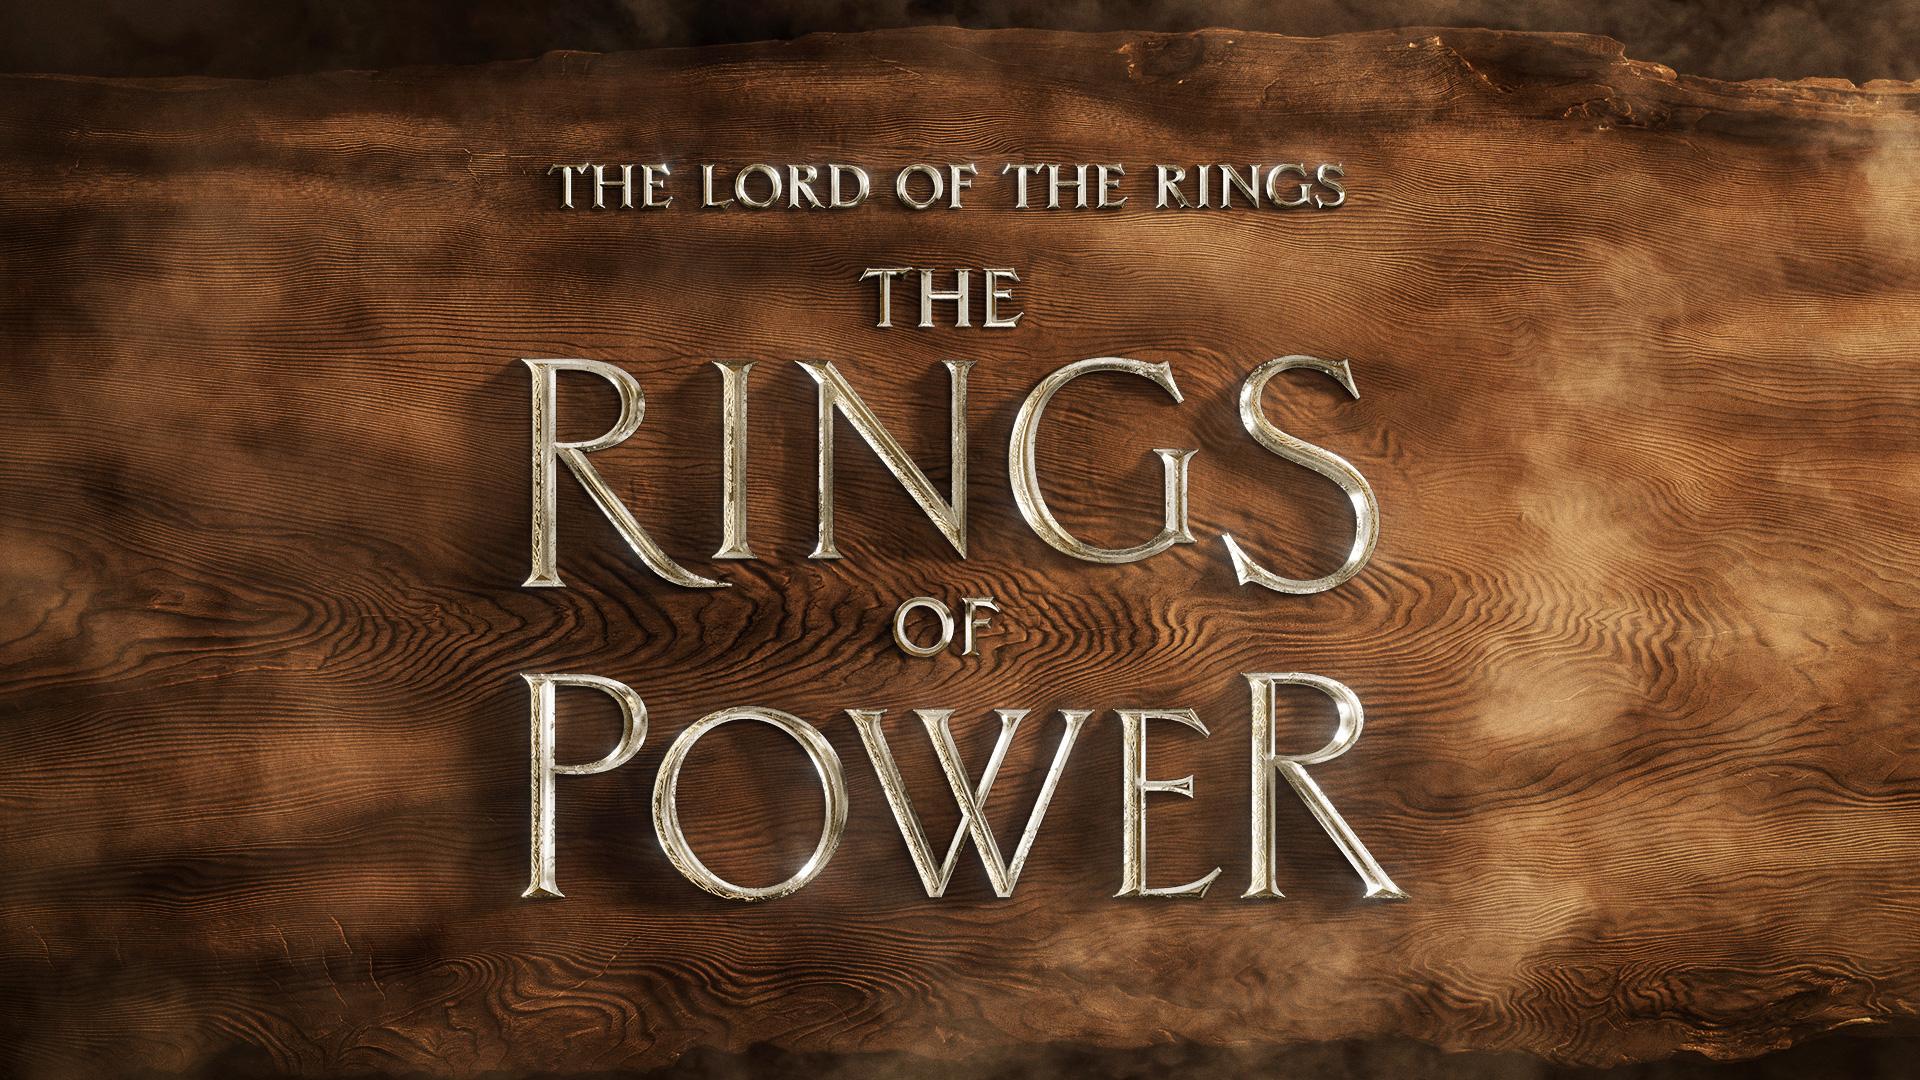 Prime Video’s Most Anticipated New Series of 2022 Reveals Its Title “THE LORD OF THE RINGS: THE RINGS OF POWER”. #TheLordOfTheRings #TheRingsOfPower